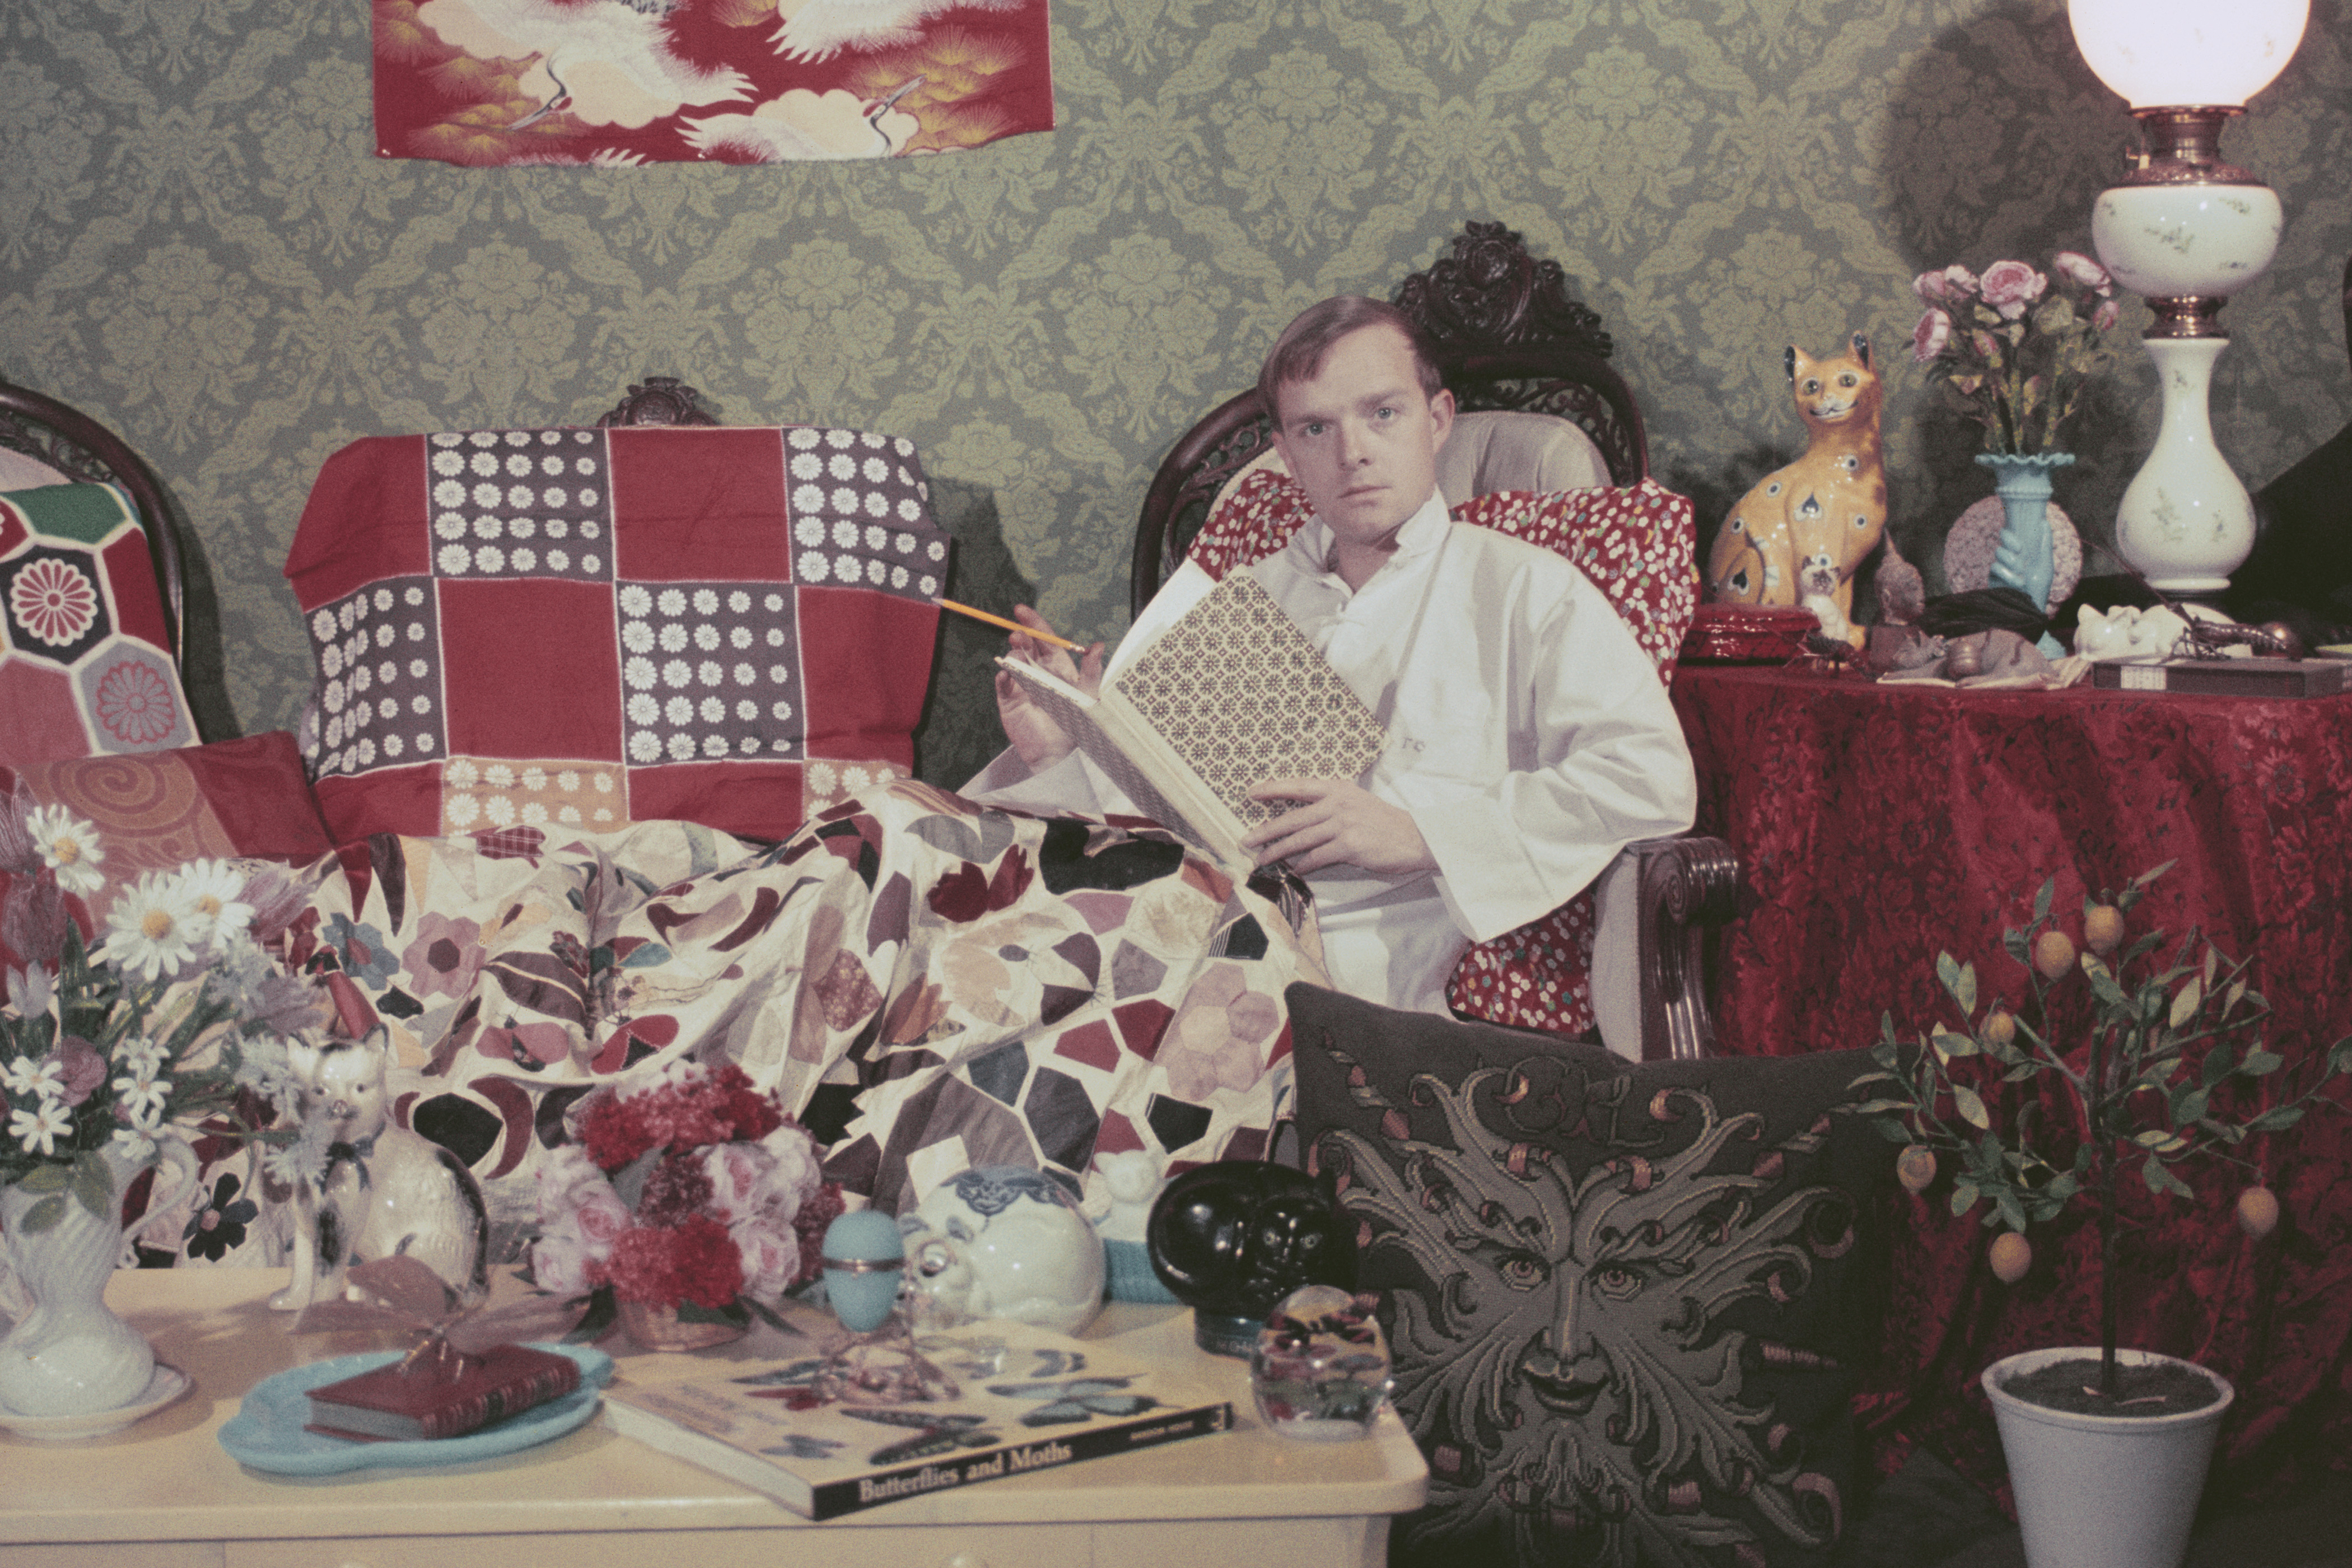 A photograph of Truman Capote, at home, sitting in a white robe with a notebook, surrounded by blankets and ornaments